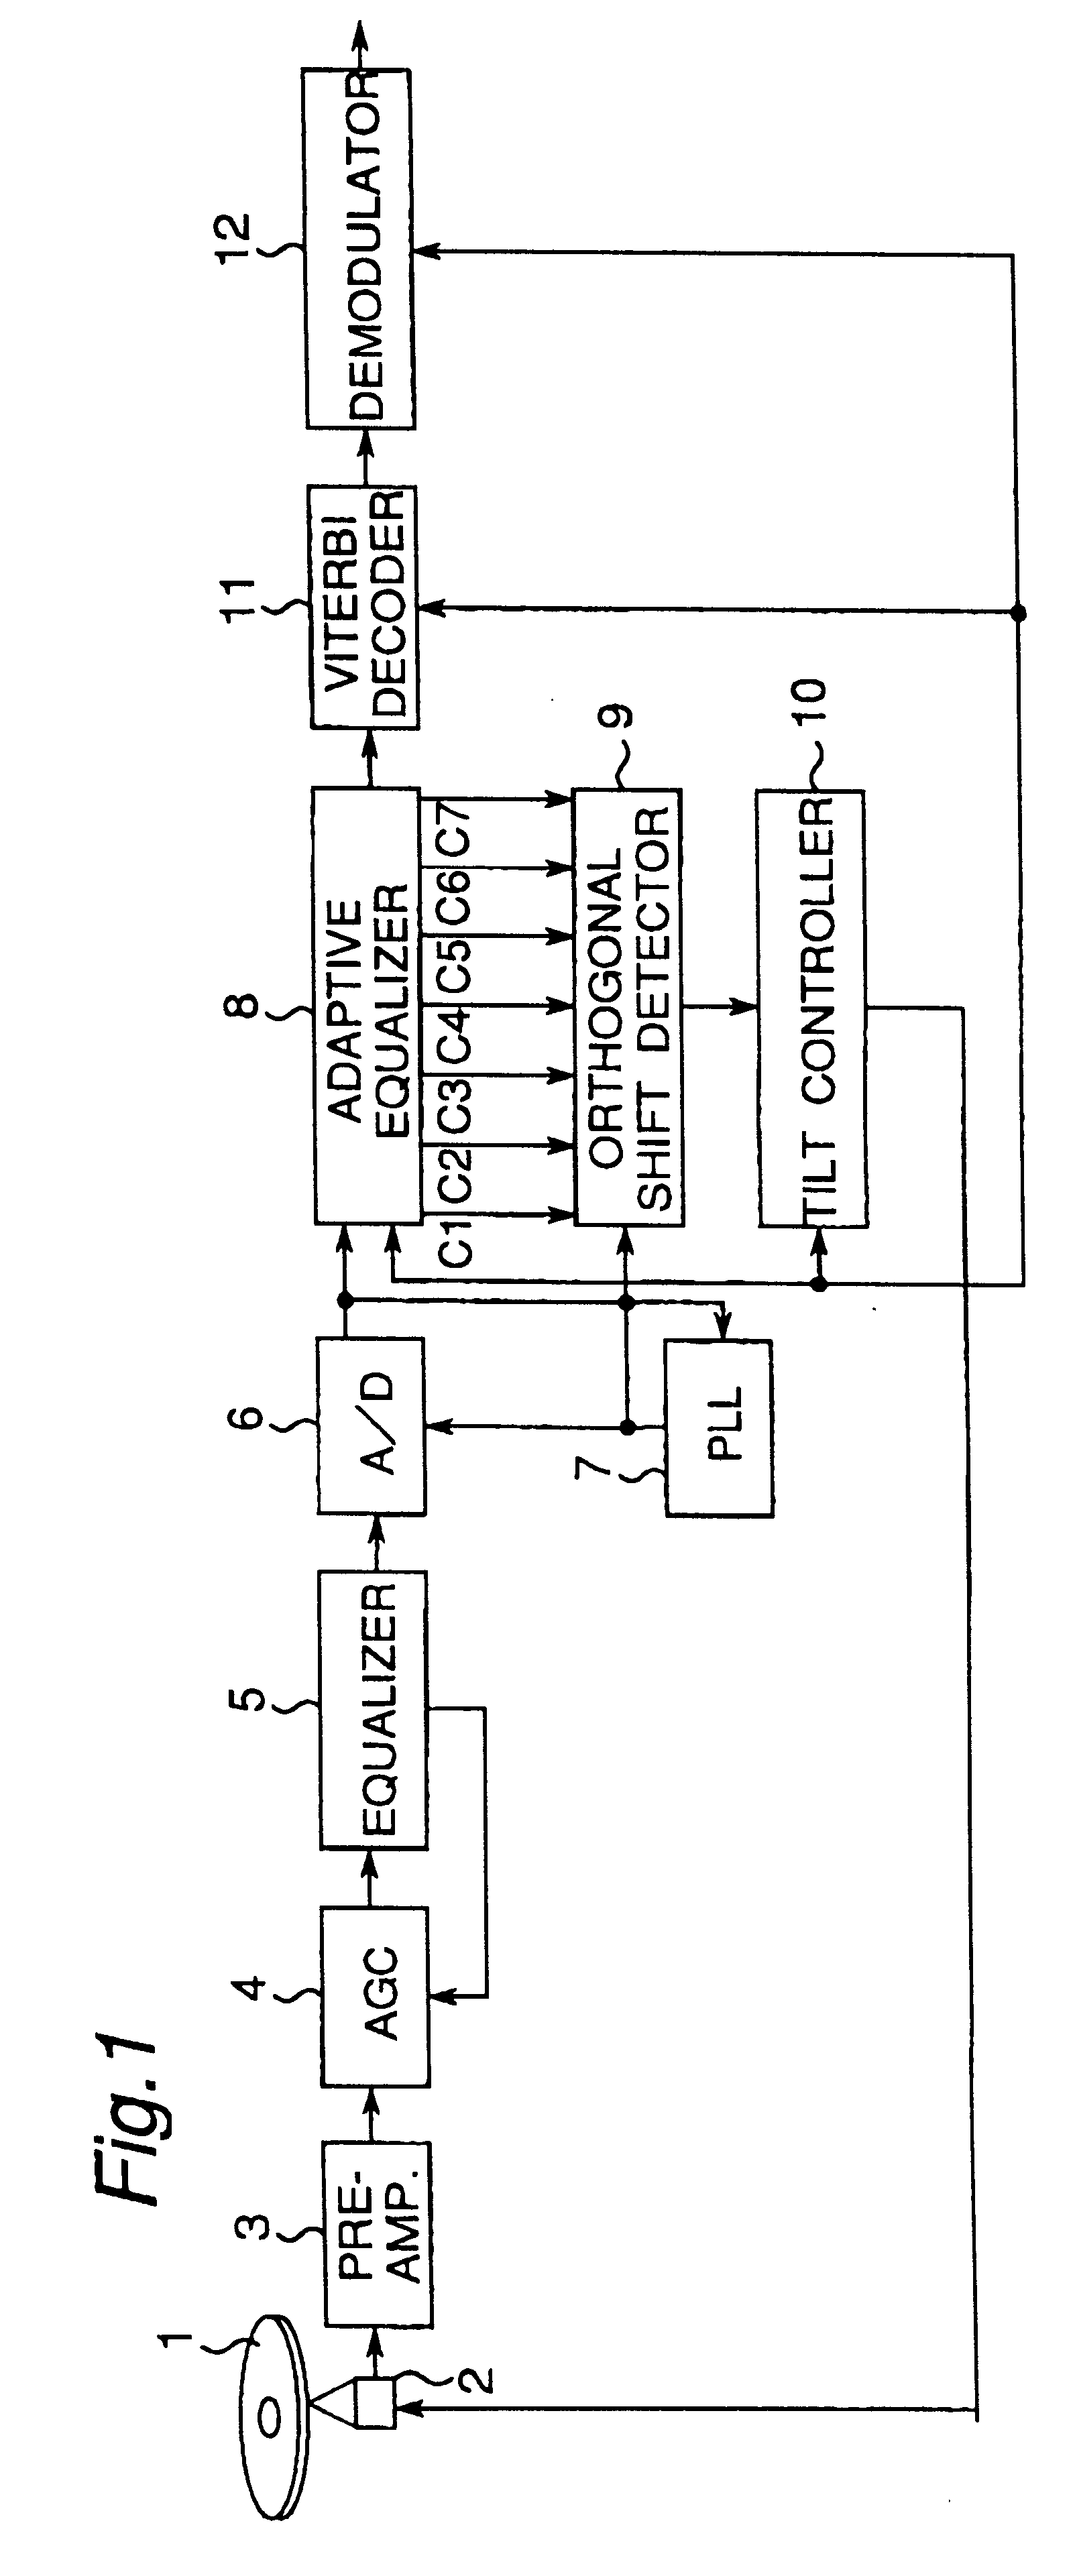 Optical disk apparatus using tilt and aberration correction control system